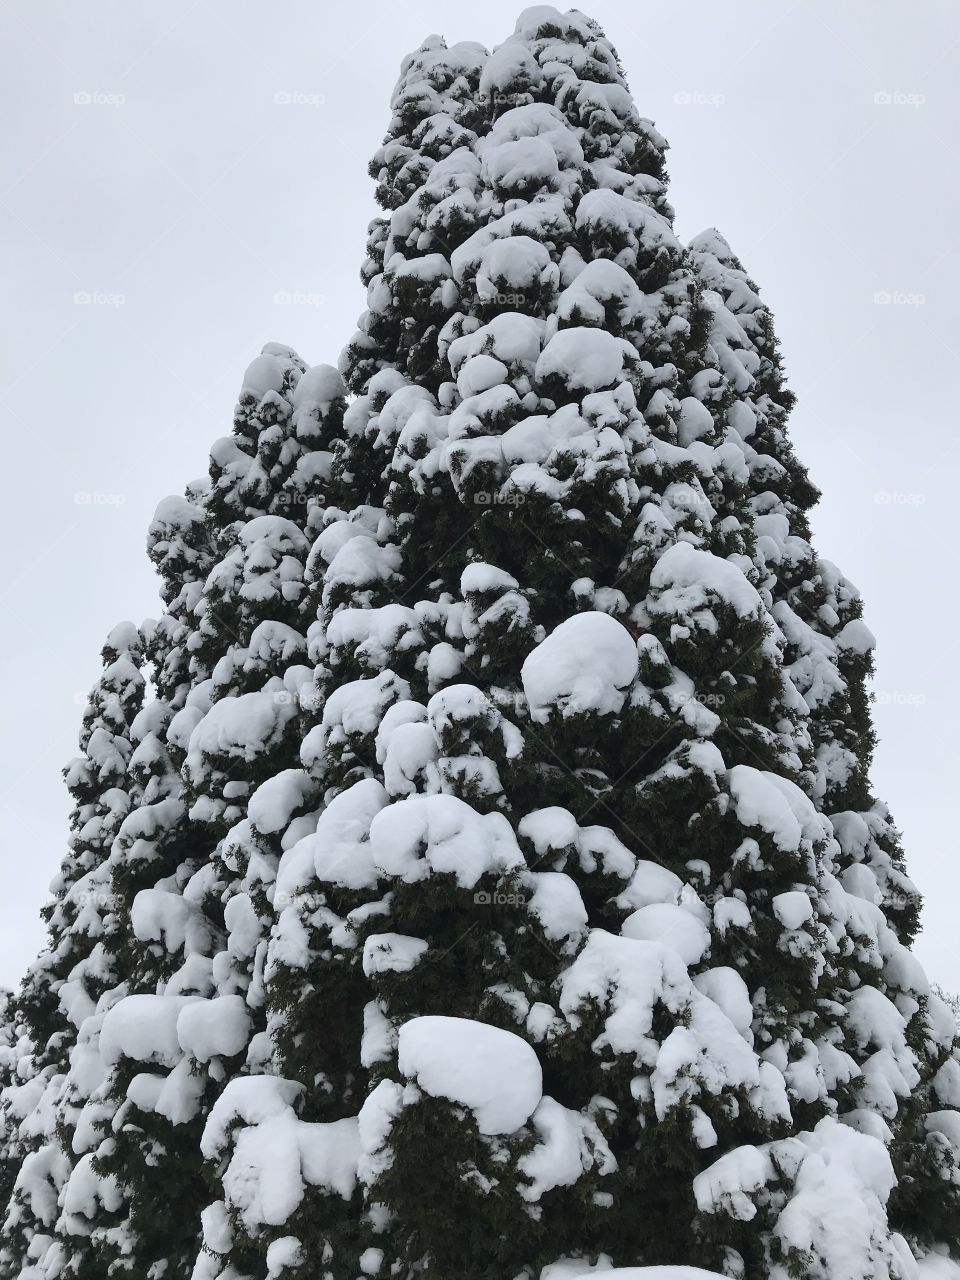 Top of snow covered tree against a grey sky